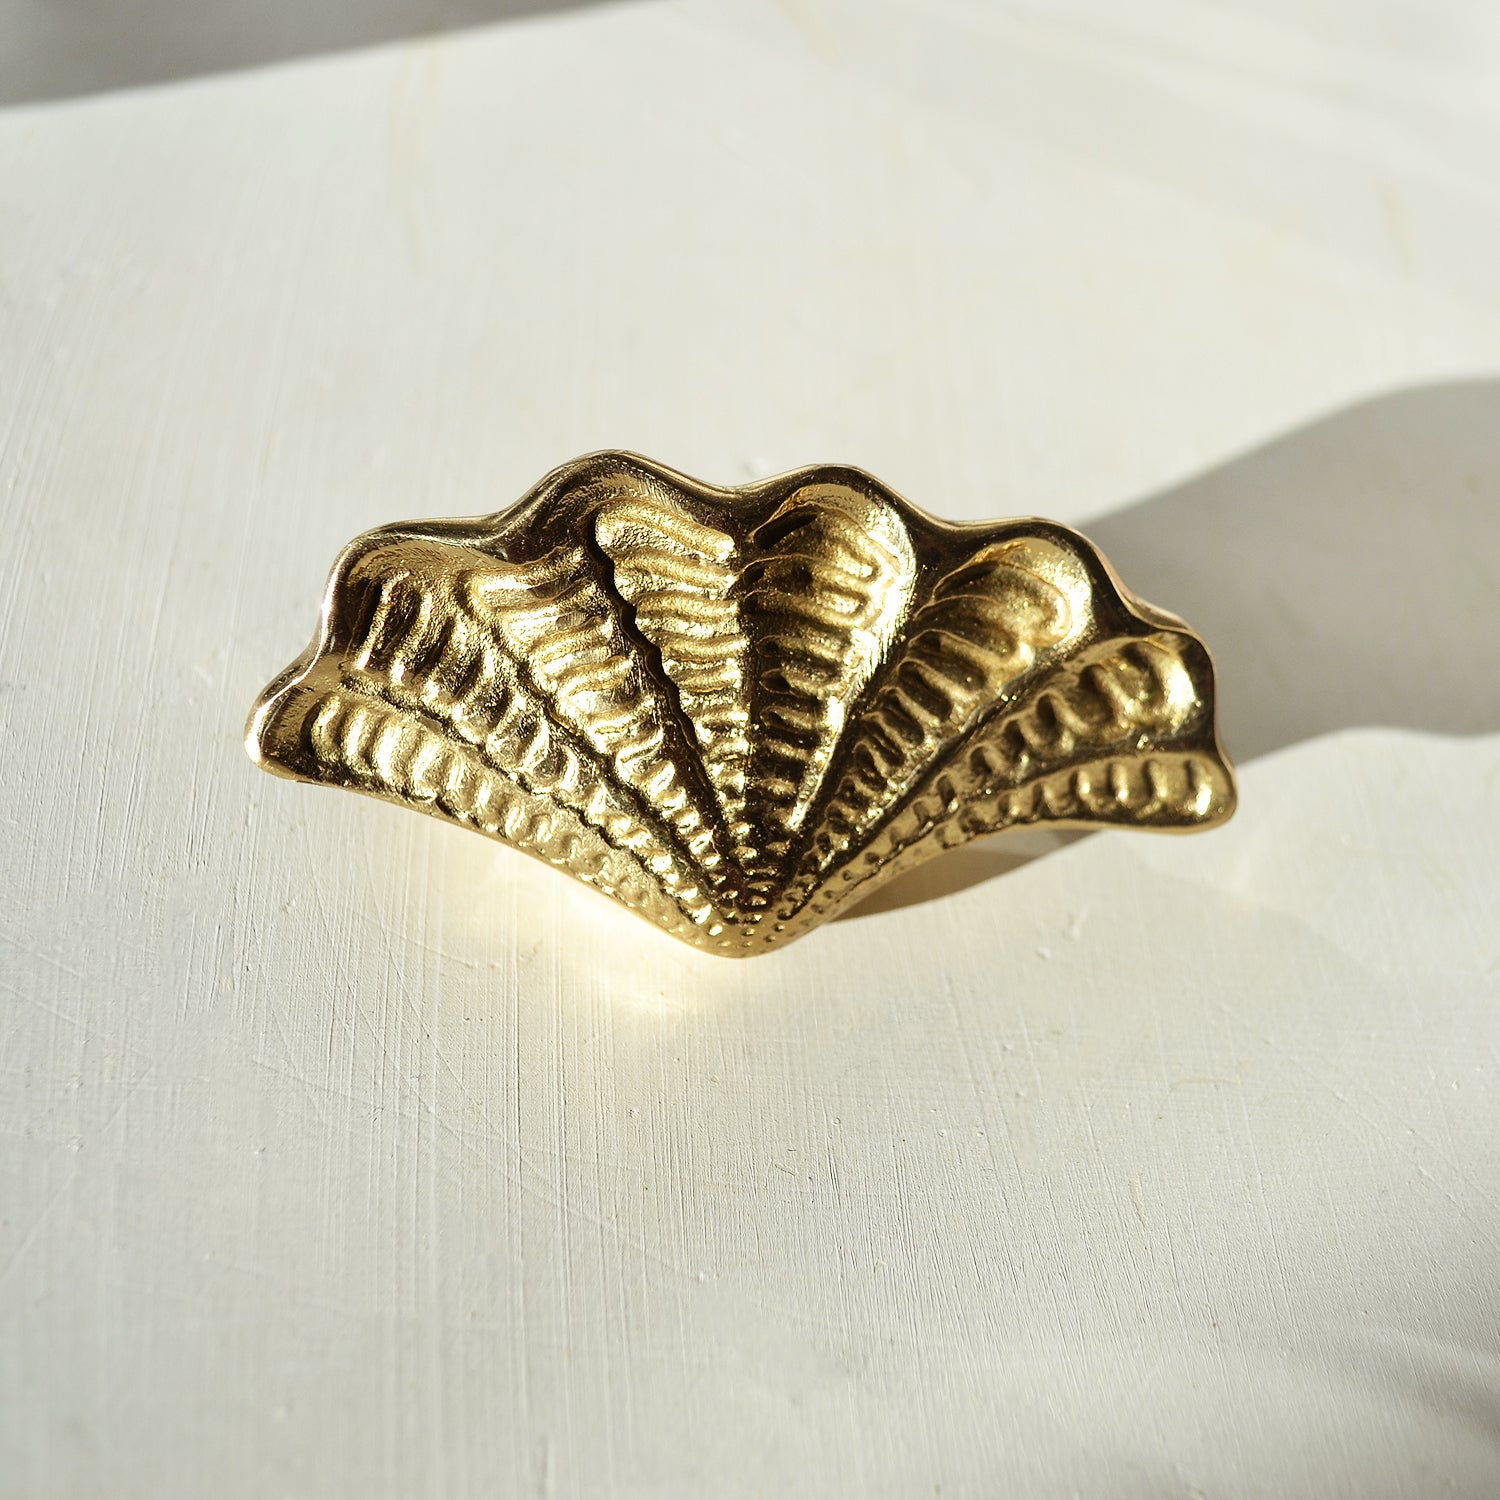 Brass seashell dish Vintage Art Deco Extremely Heavy Solid brass